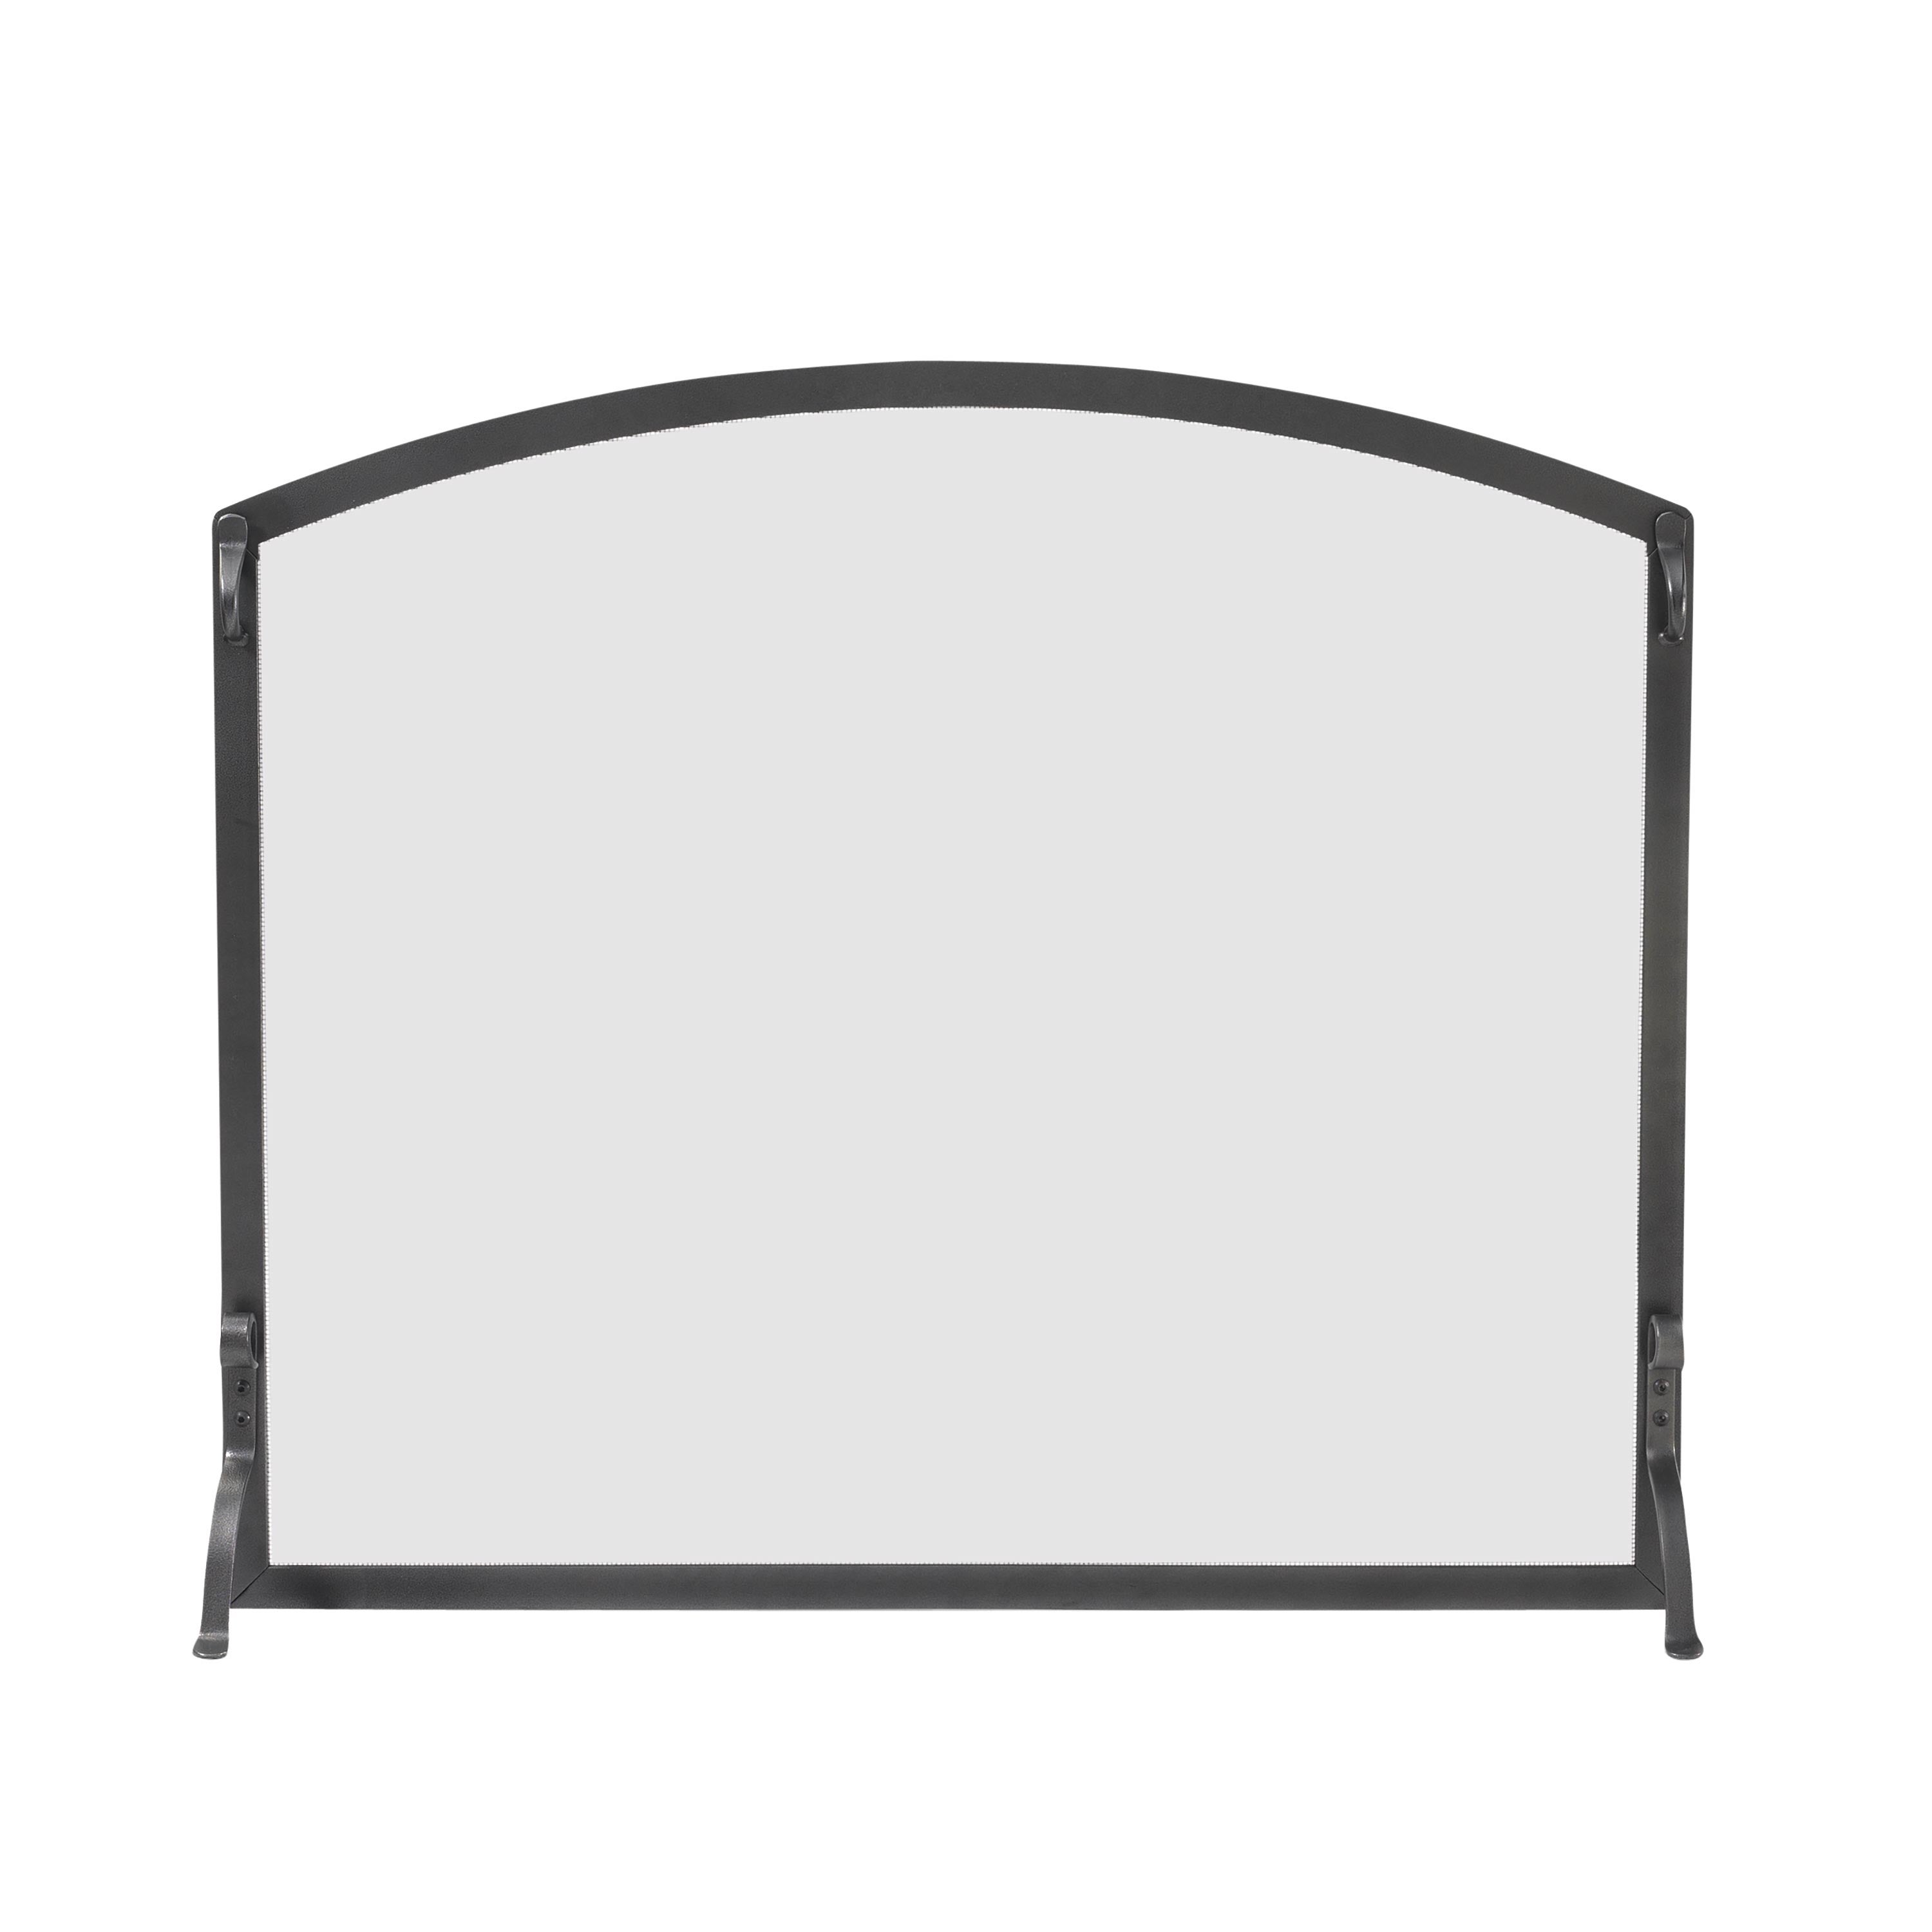 Large Custom Flat Guard with Arched Top - 2,301 to 2,650 sq. inches